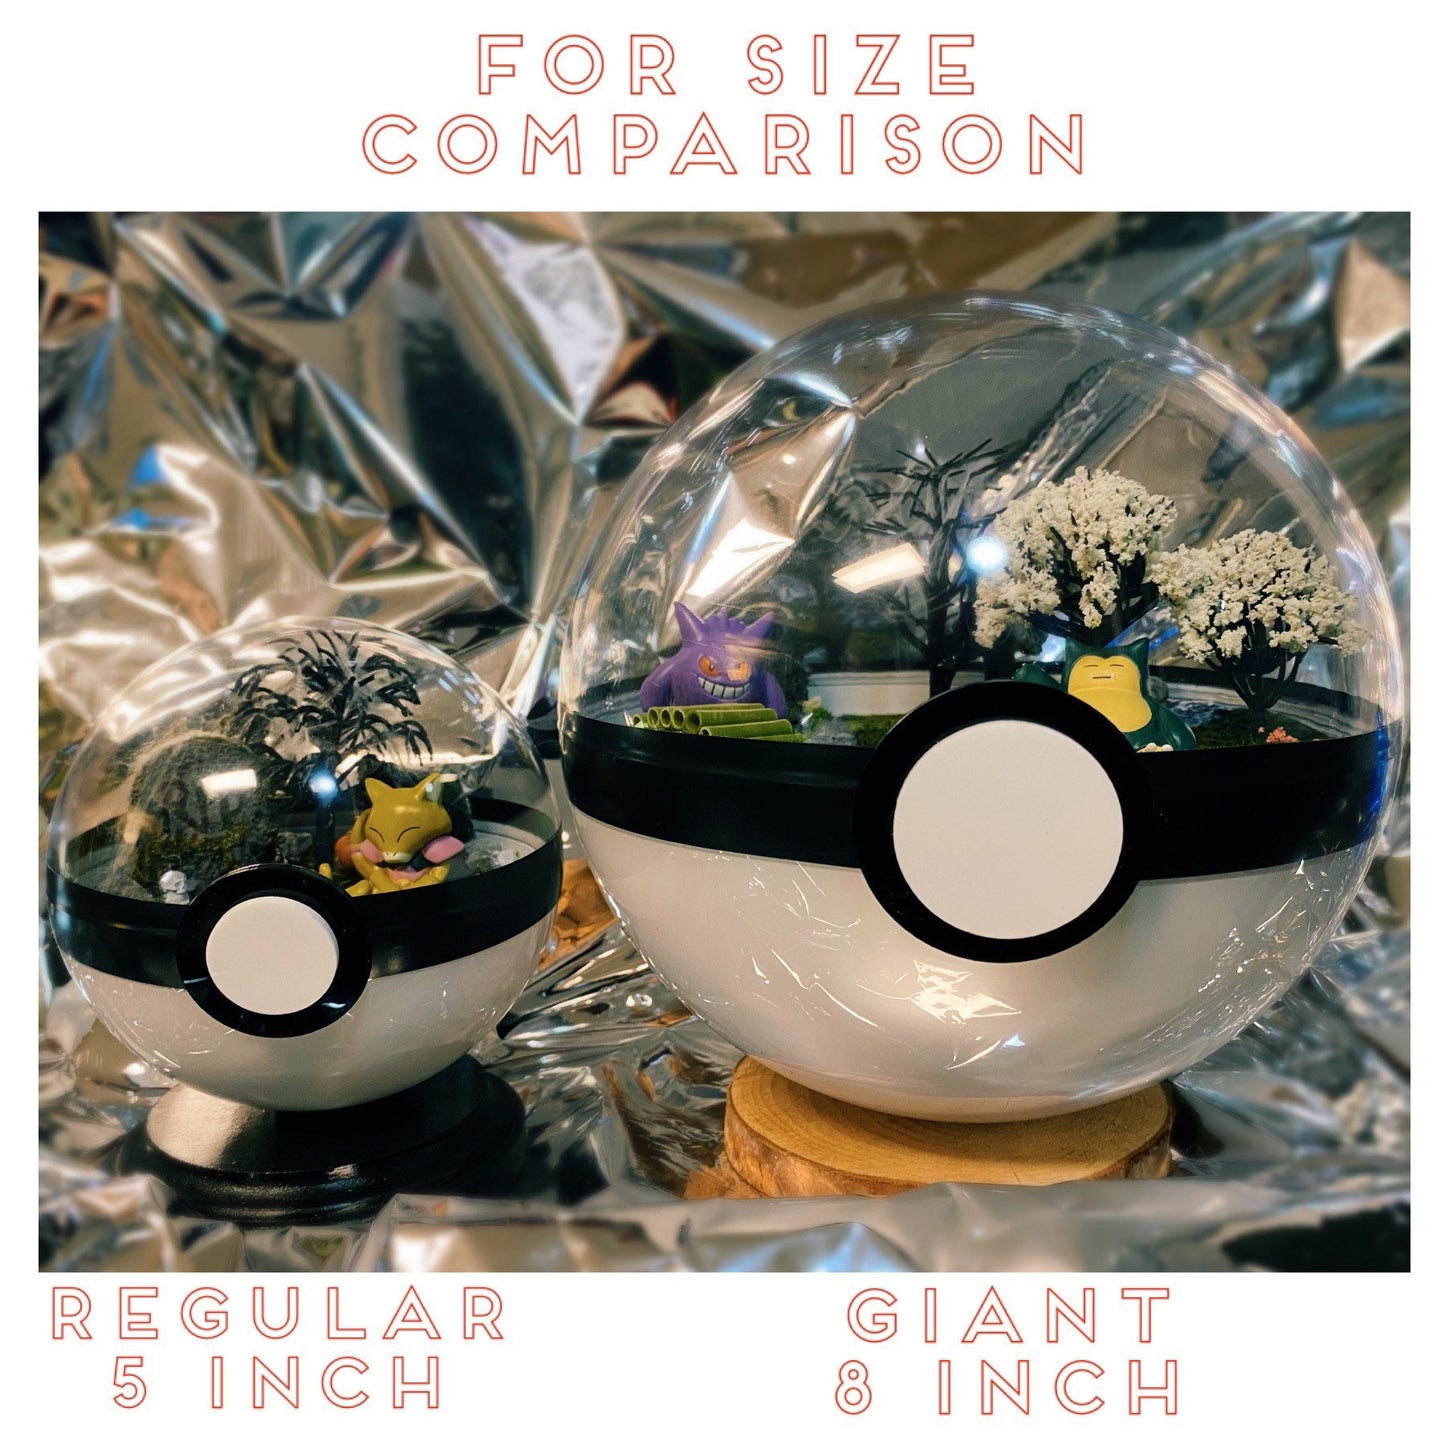 Giant wave and beach Pokeball 8 inch